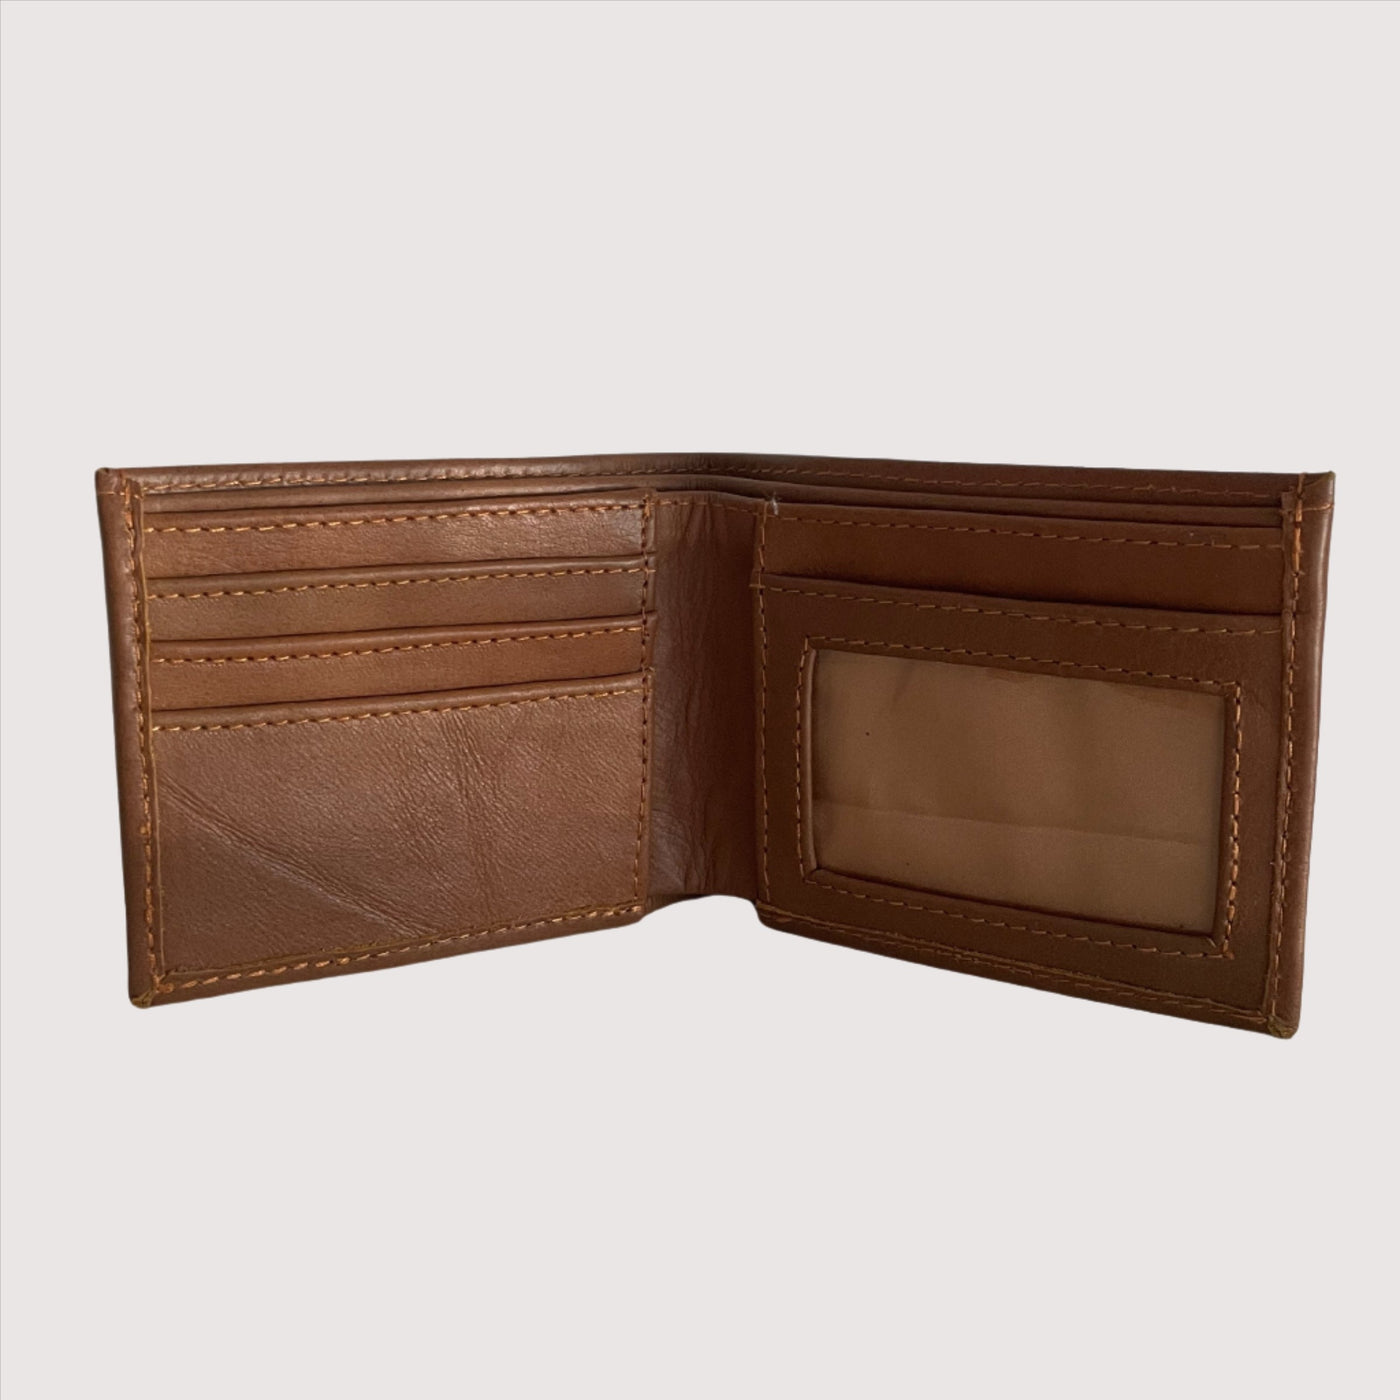 Tan Leather James Wallet